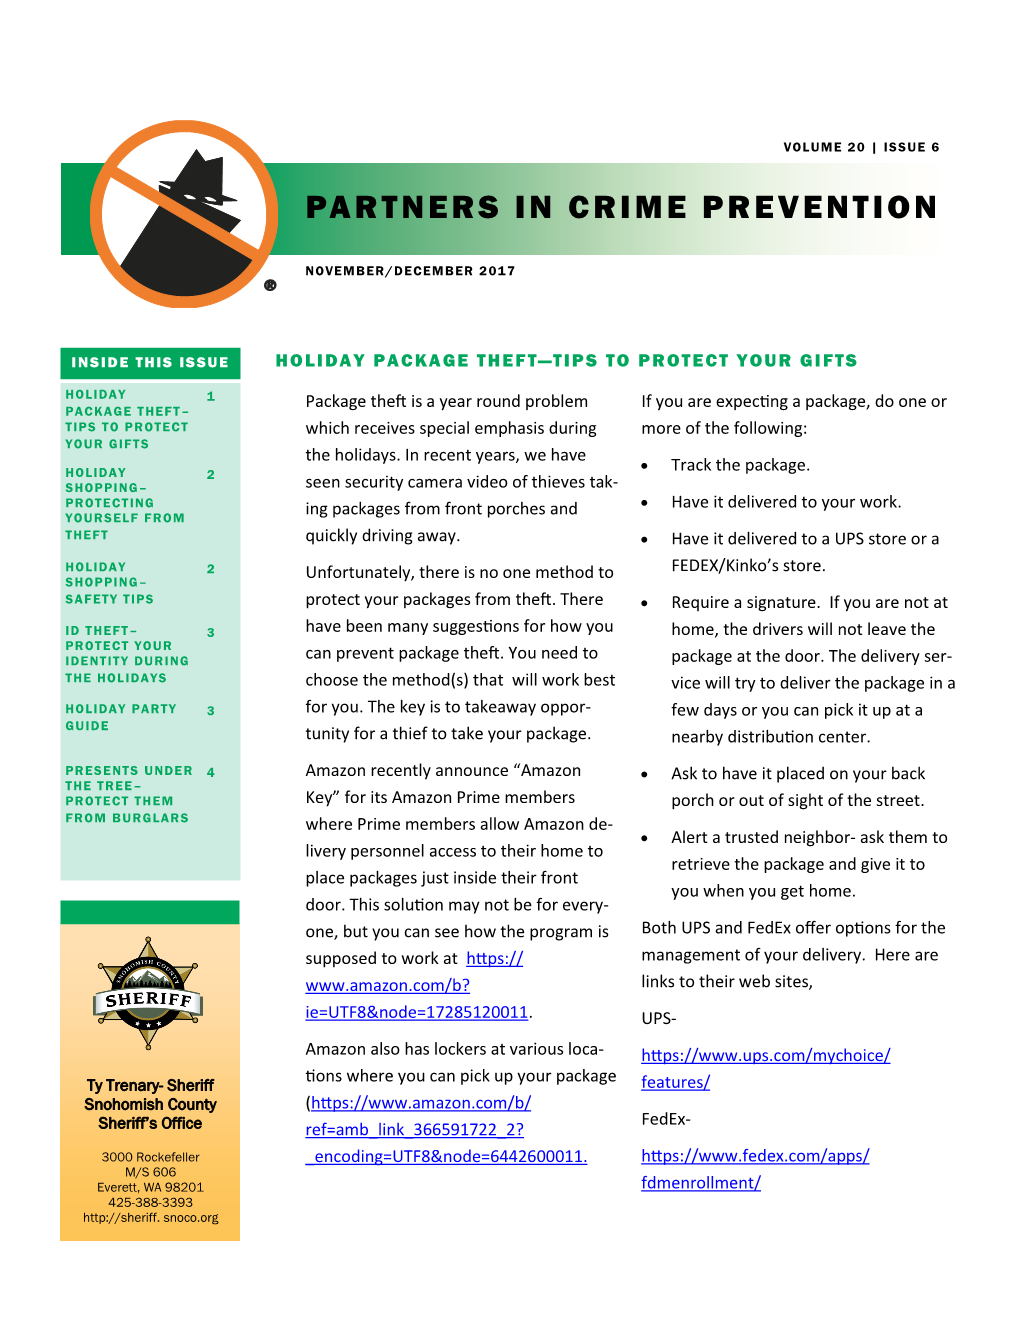 Holiday Package Theft Prevention